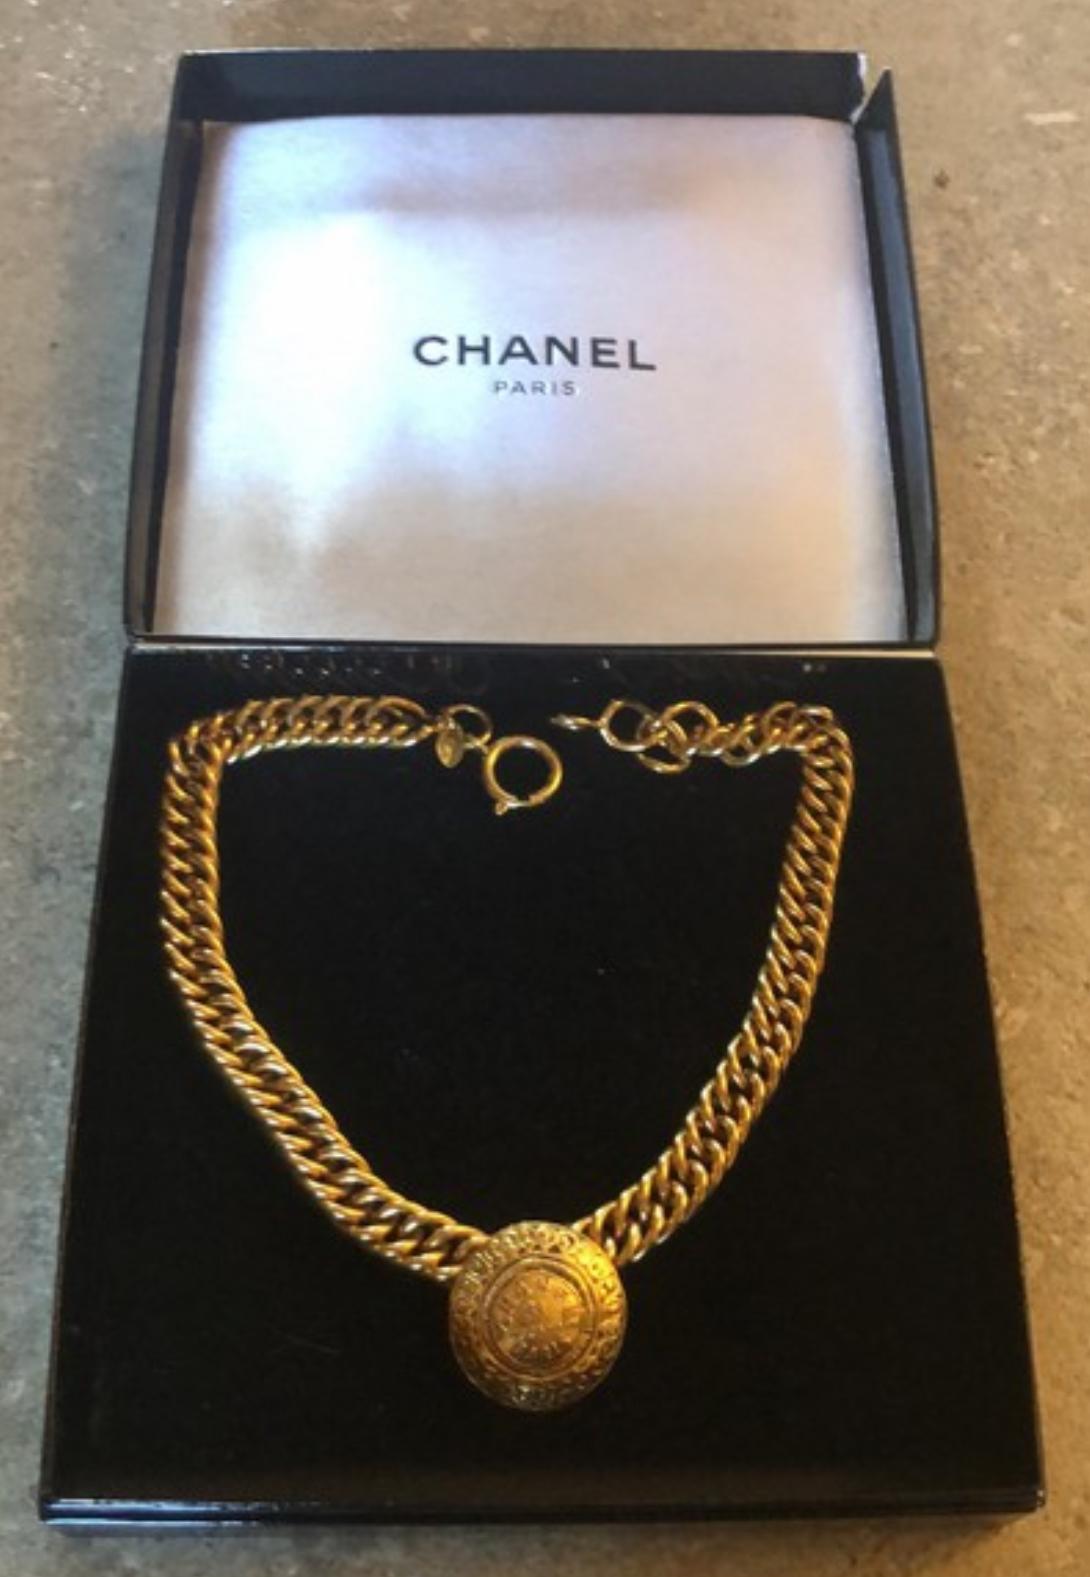 Chanel vintage iconic necklace.
Necklace with a Medaillon 